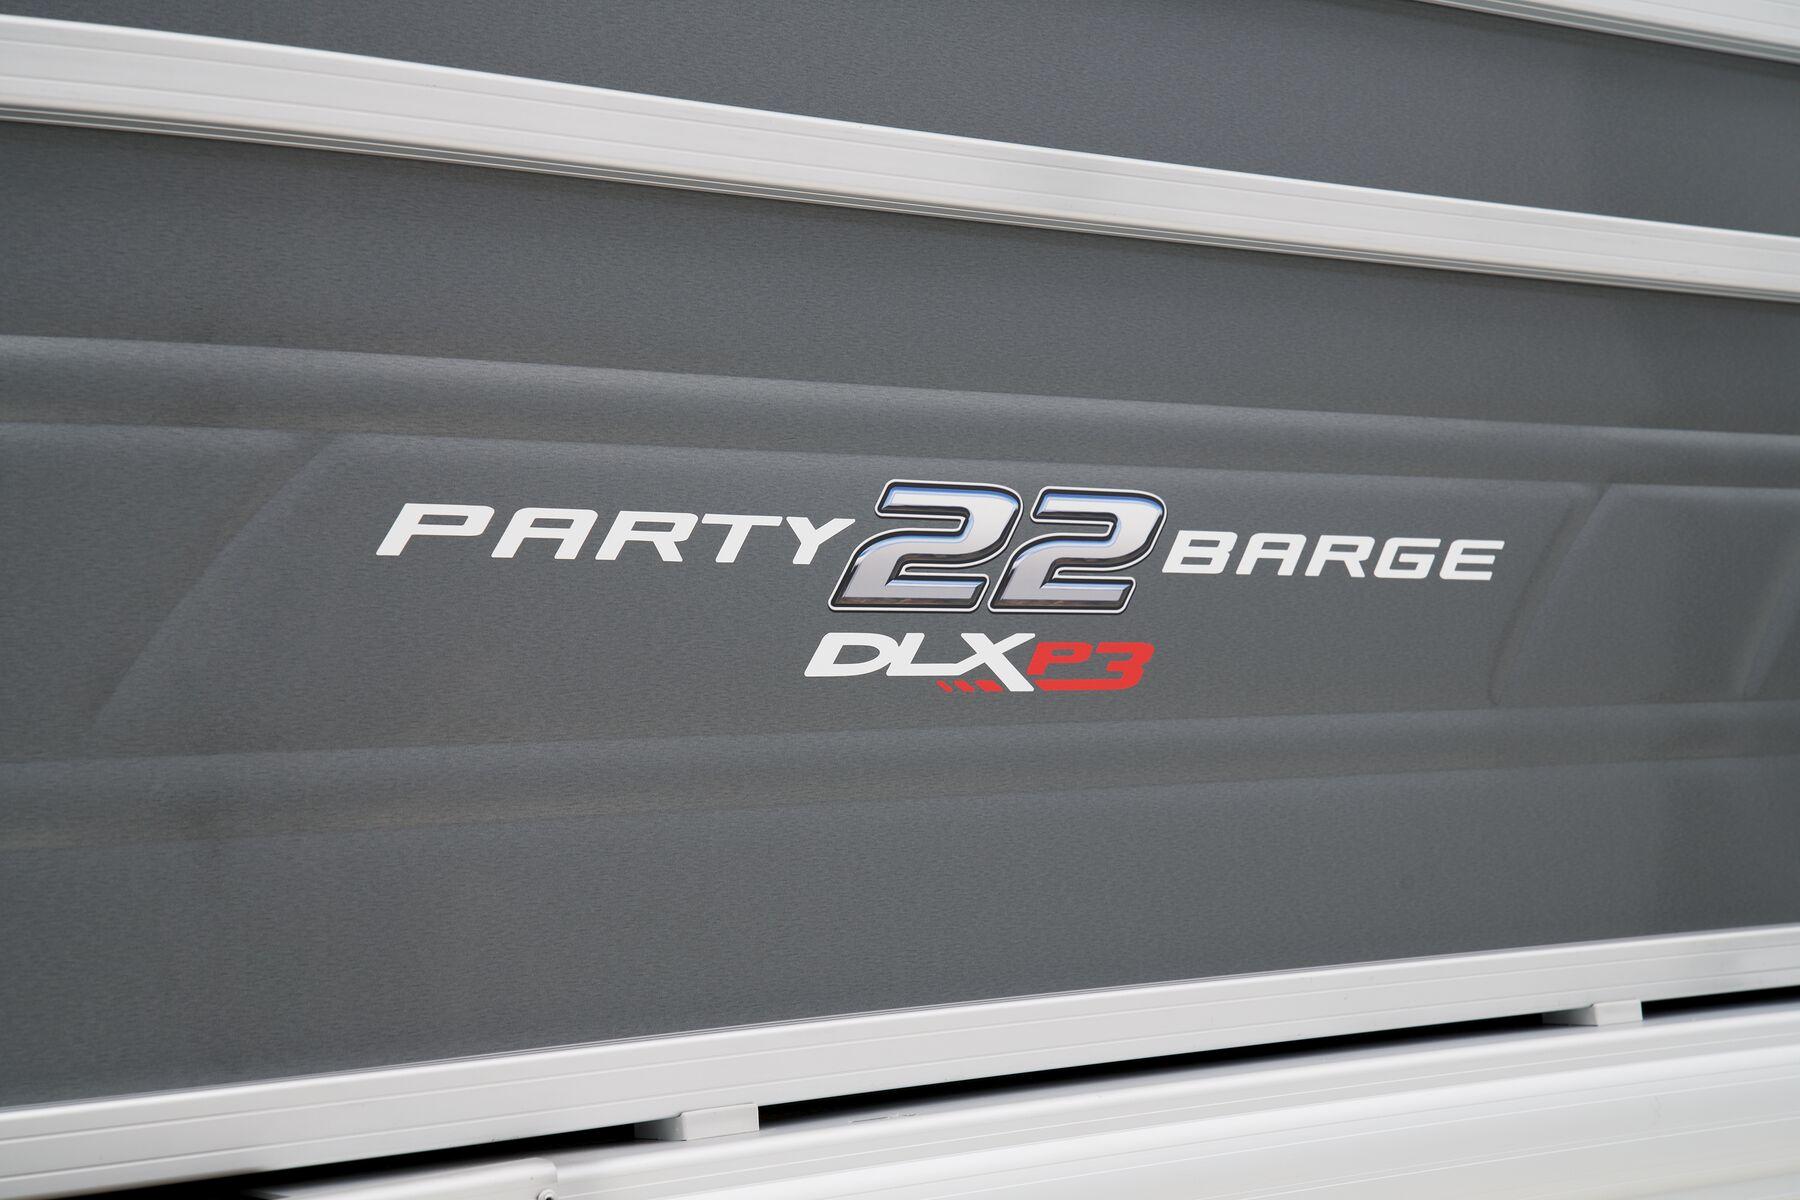 Party Barge 22 RF XP3